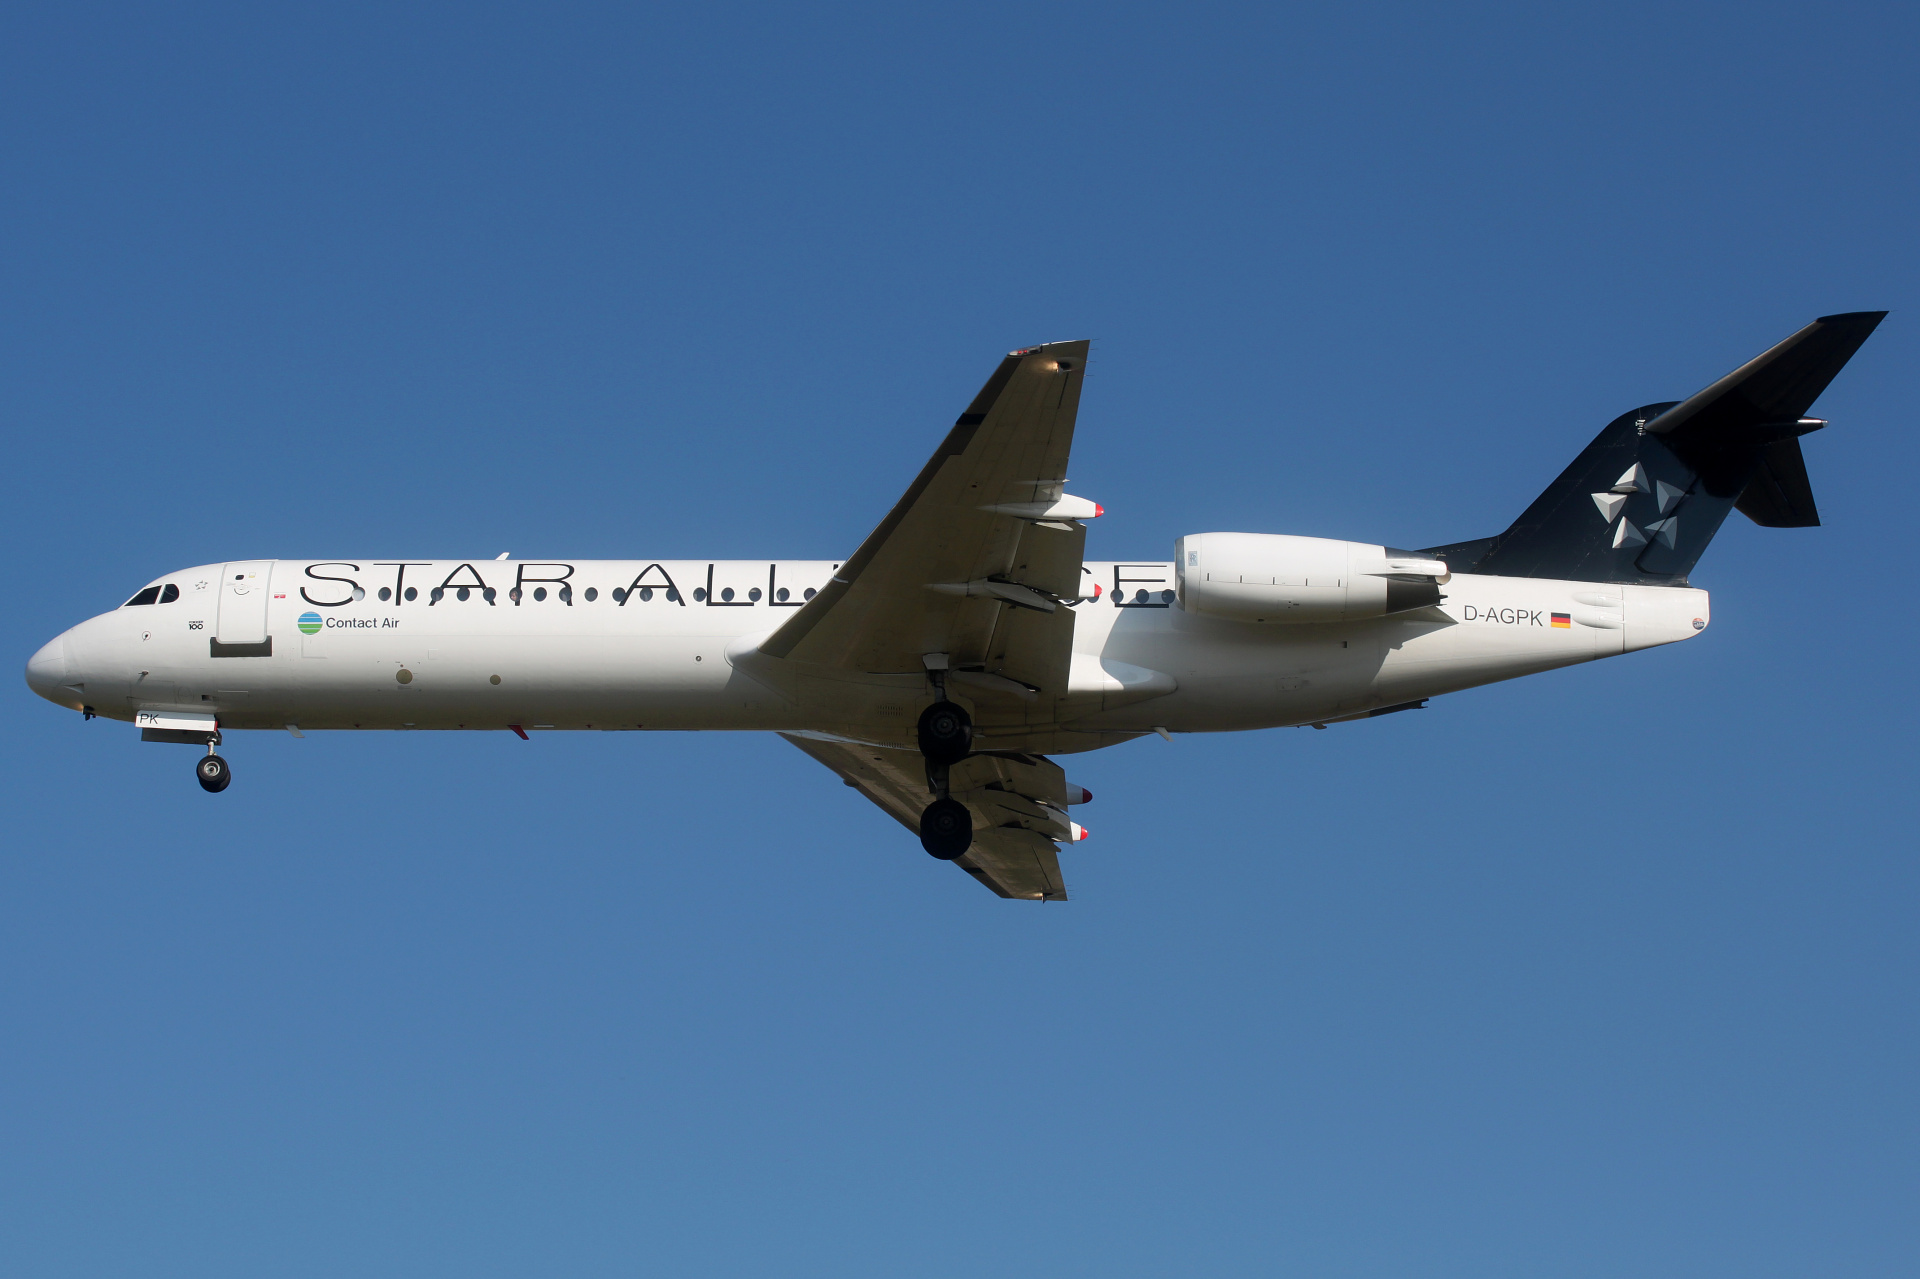 D-AGPK (Star Alliance livery) (Aircraft » EPWA Spotting » Fokker 100 » Contact Air)